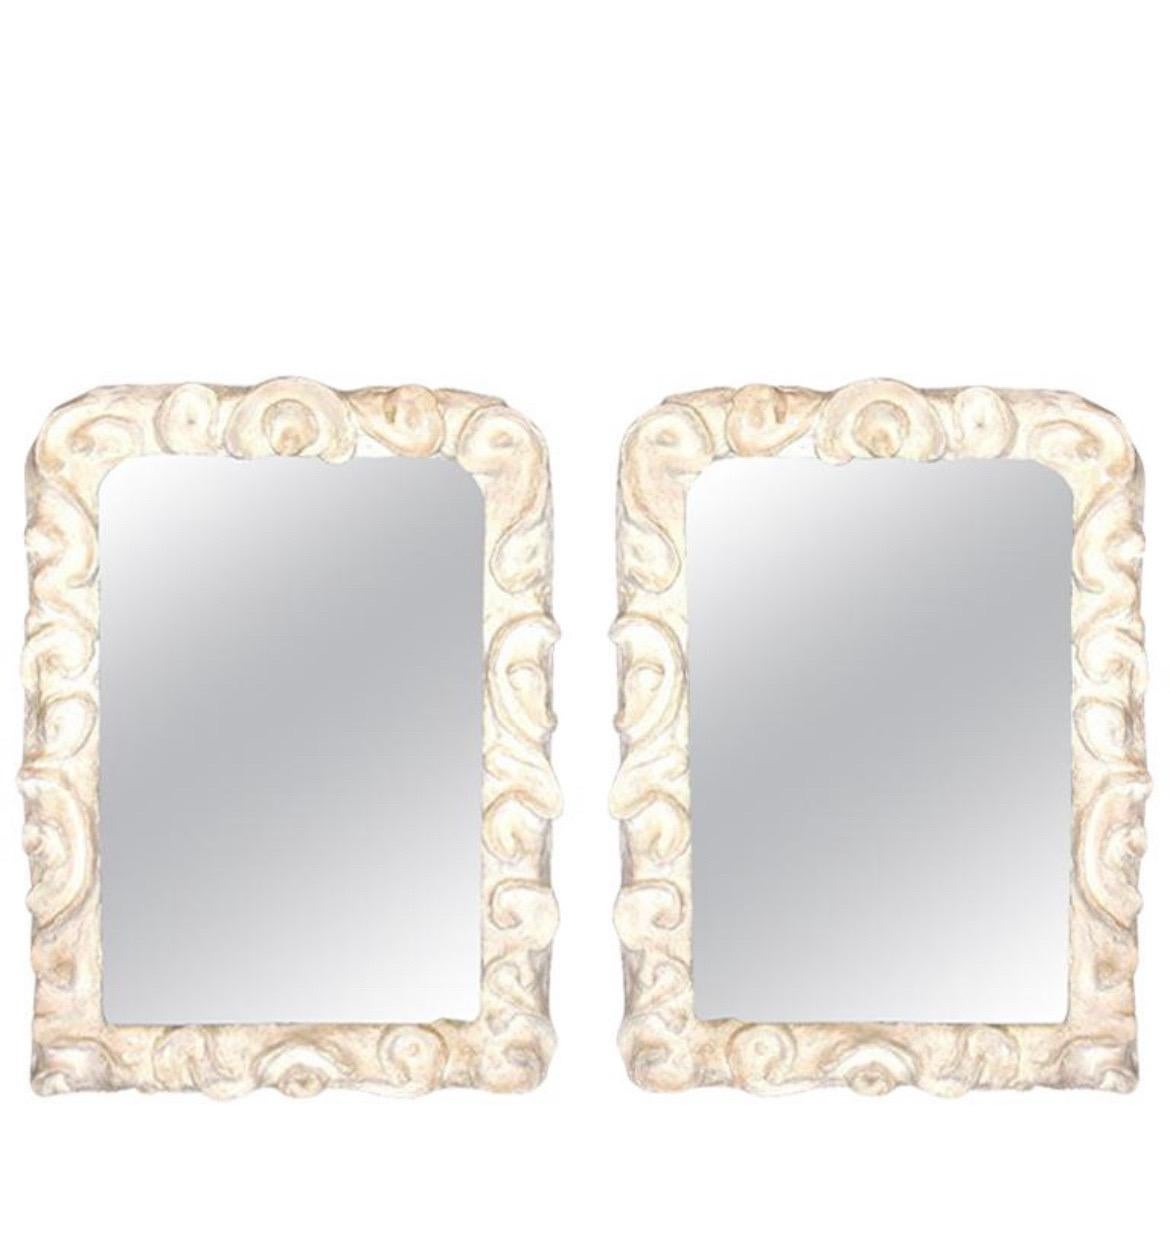 2 Dramatic and Poetic French Mid-Century Modern style wall mirrors composed of handcrafted plaster in the style of Serge Roche. Serge Roche worked heavily in plaster creations and mirrors were a great object of fascination for him. These pieces